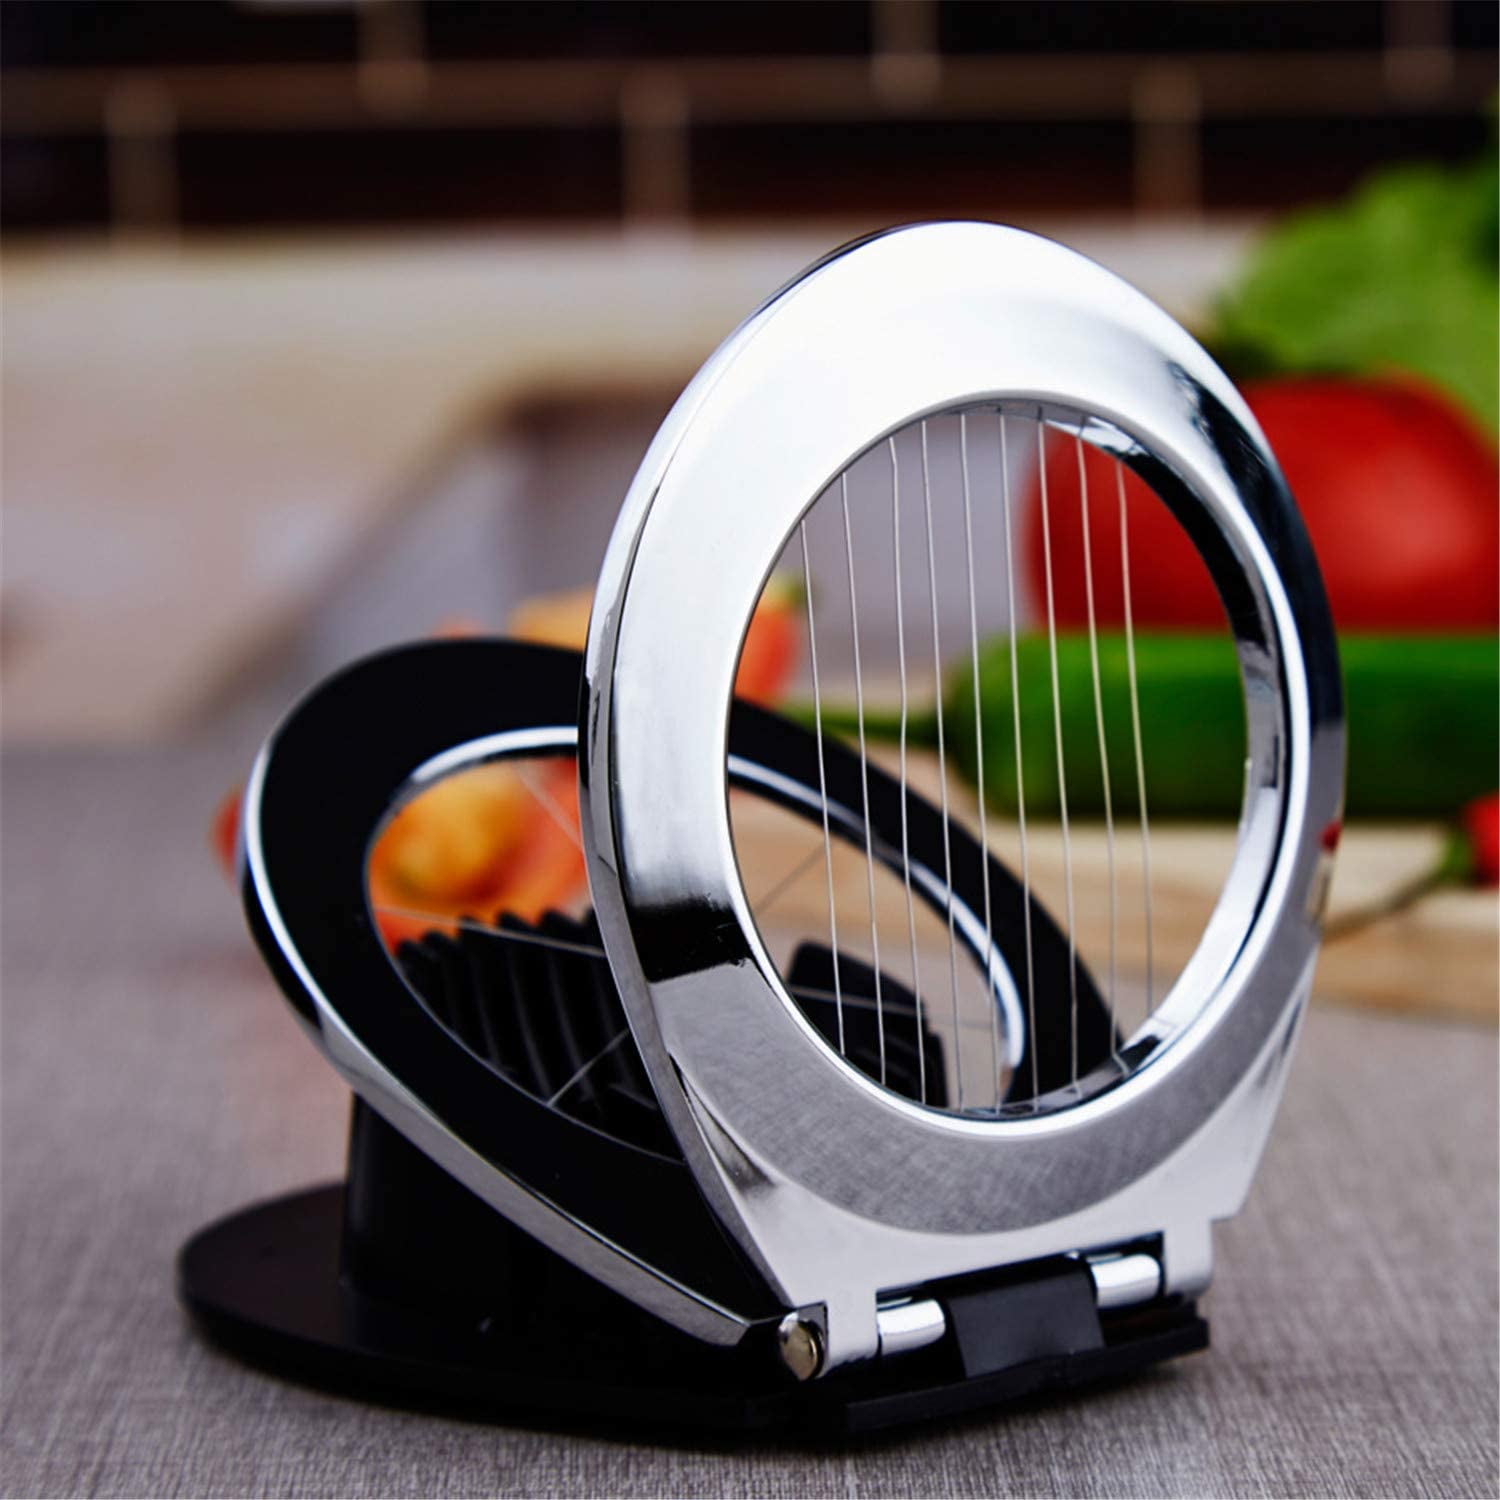 Shop for Stainless Steel 3 in 1 Wire Boiled Egg Slicer Cutter Wedge Half  and Soft Vegetables Kitchen Tool (Blue) at Wholesale Price on